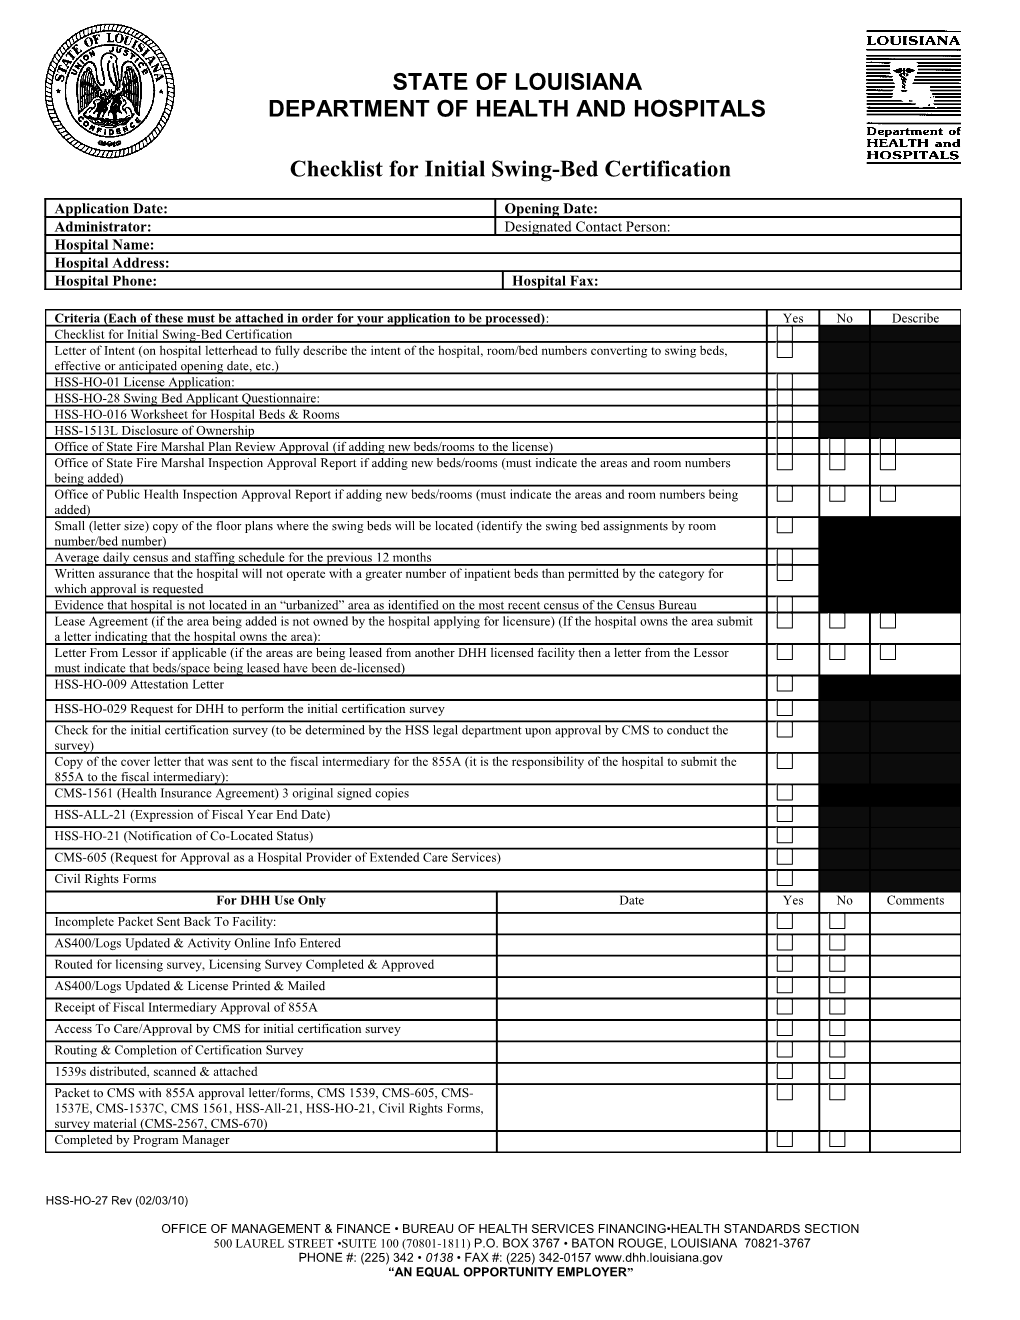 Checklist for Initial Swing-Bed Certification